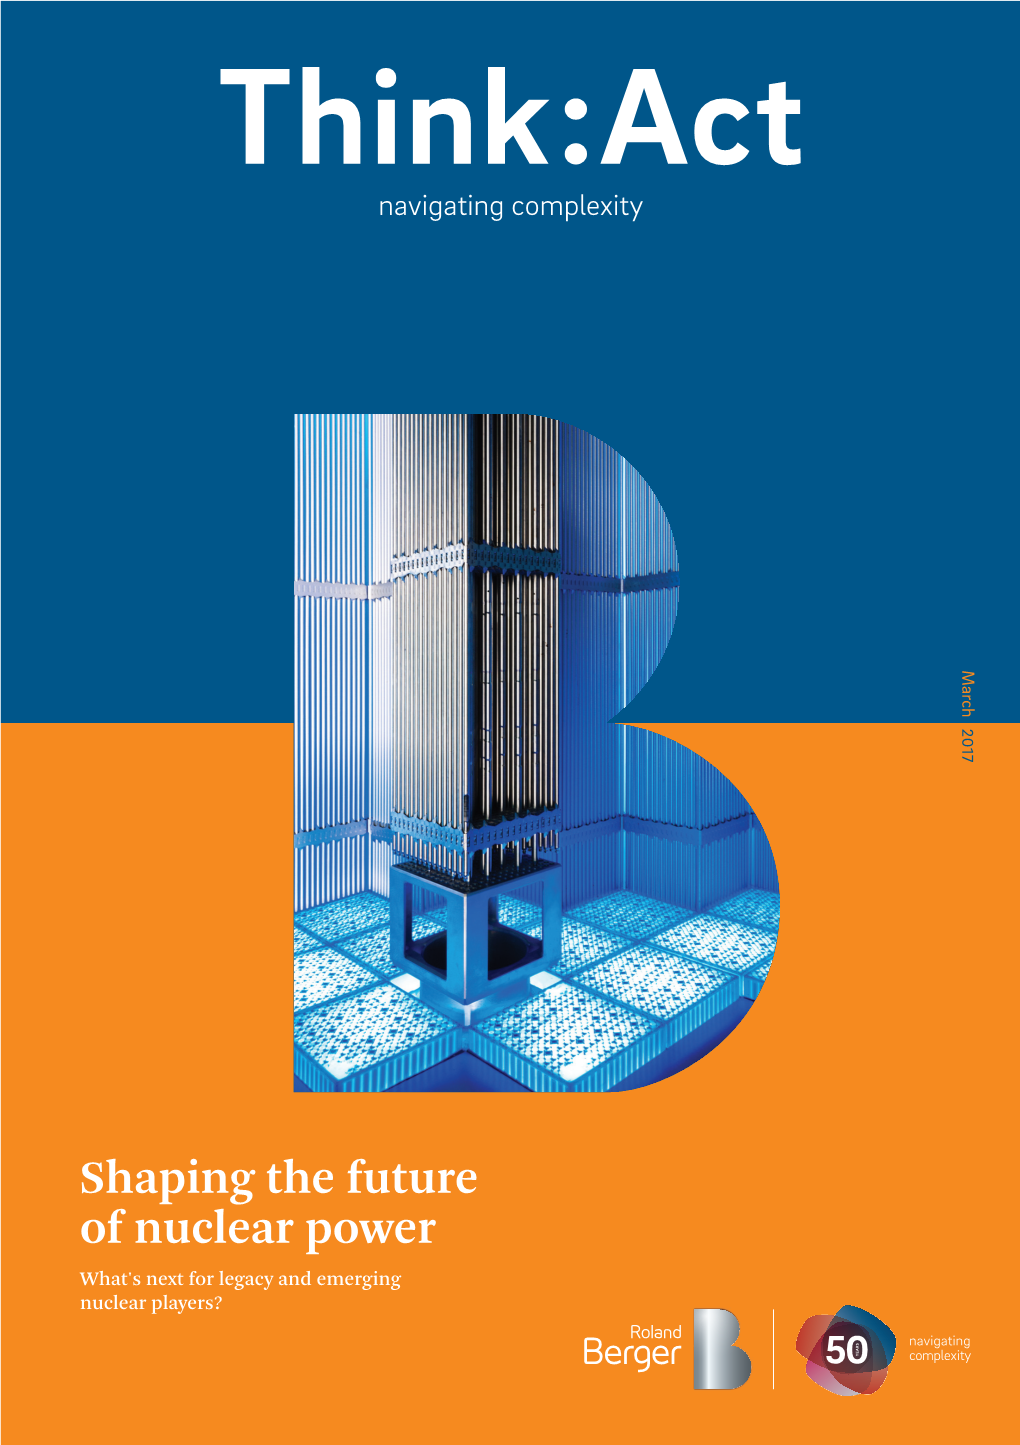 Shaping the Futures of Nuclear, What's Next for Legacy And